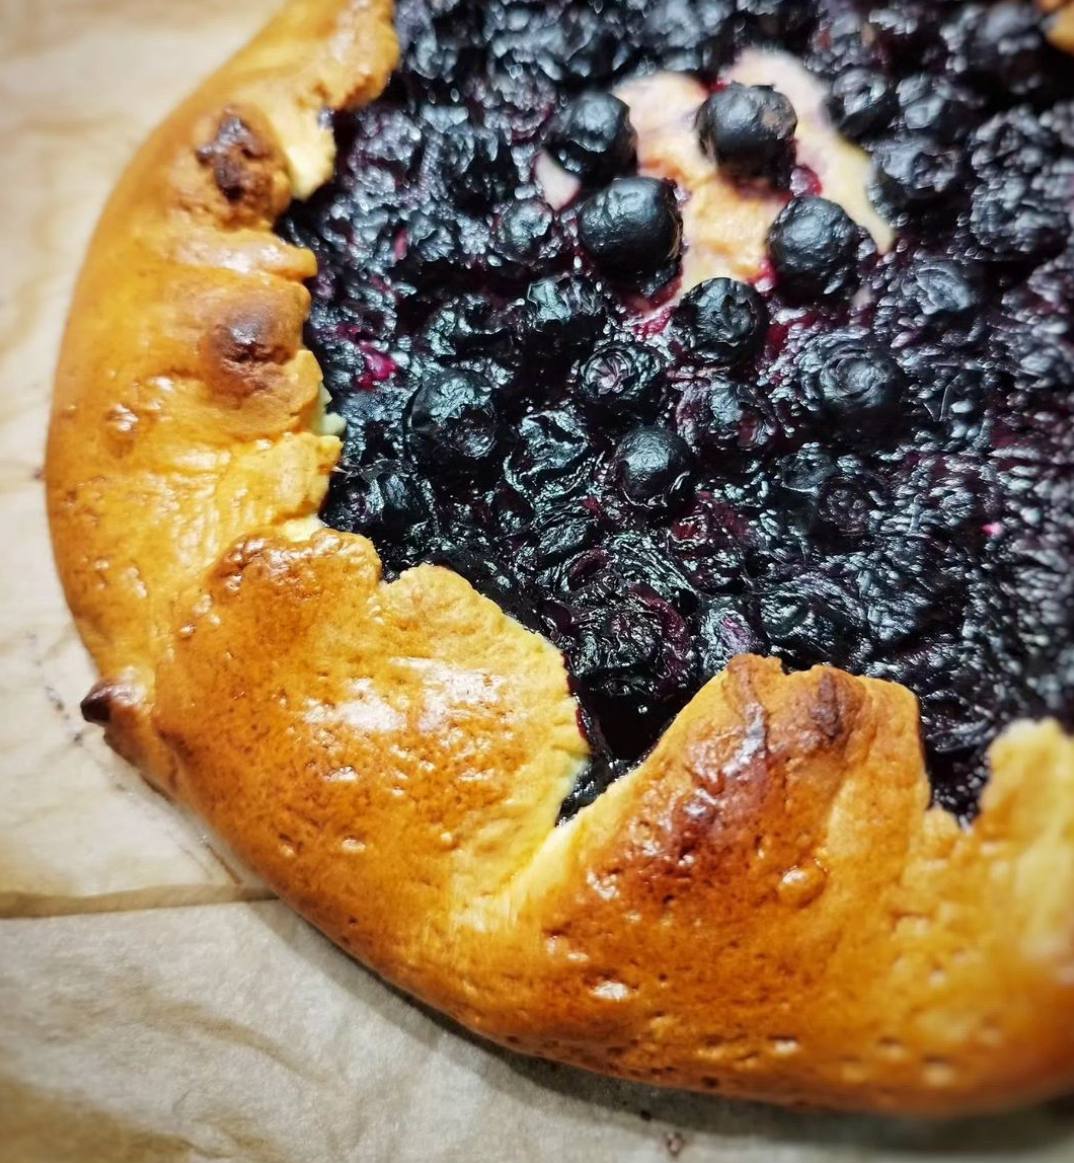 Galette with berries